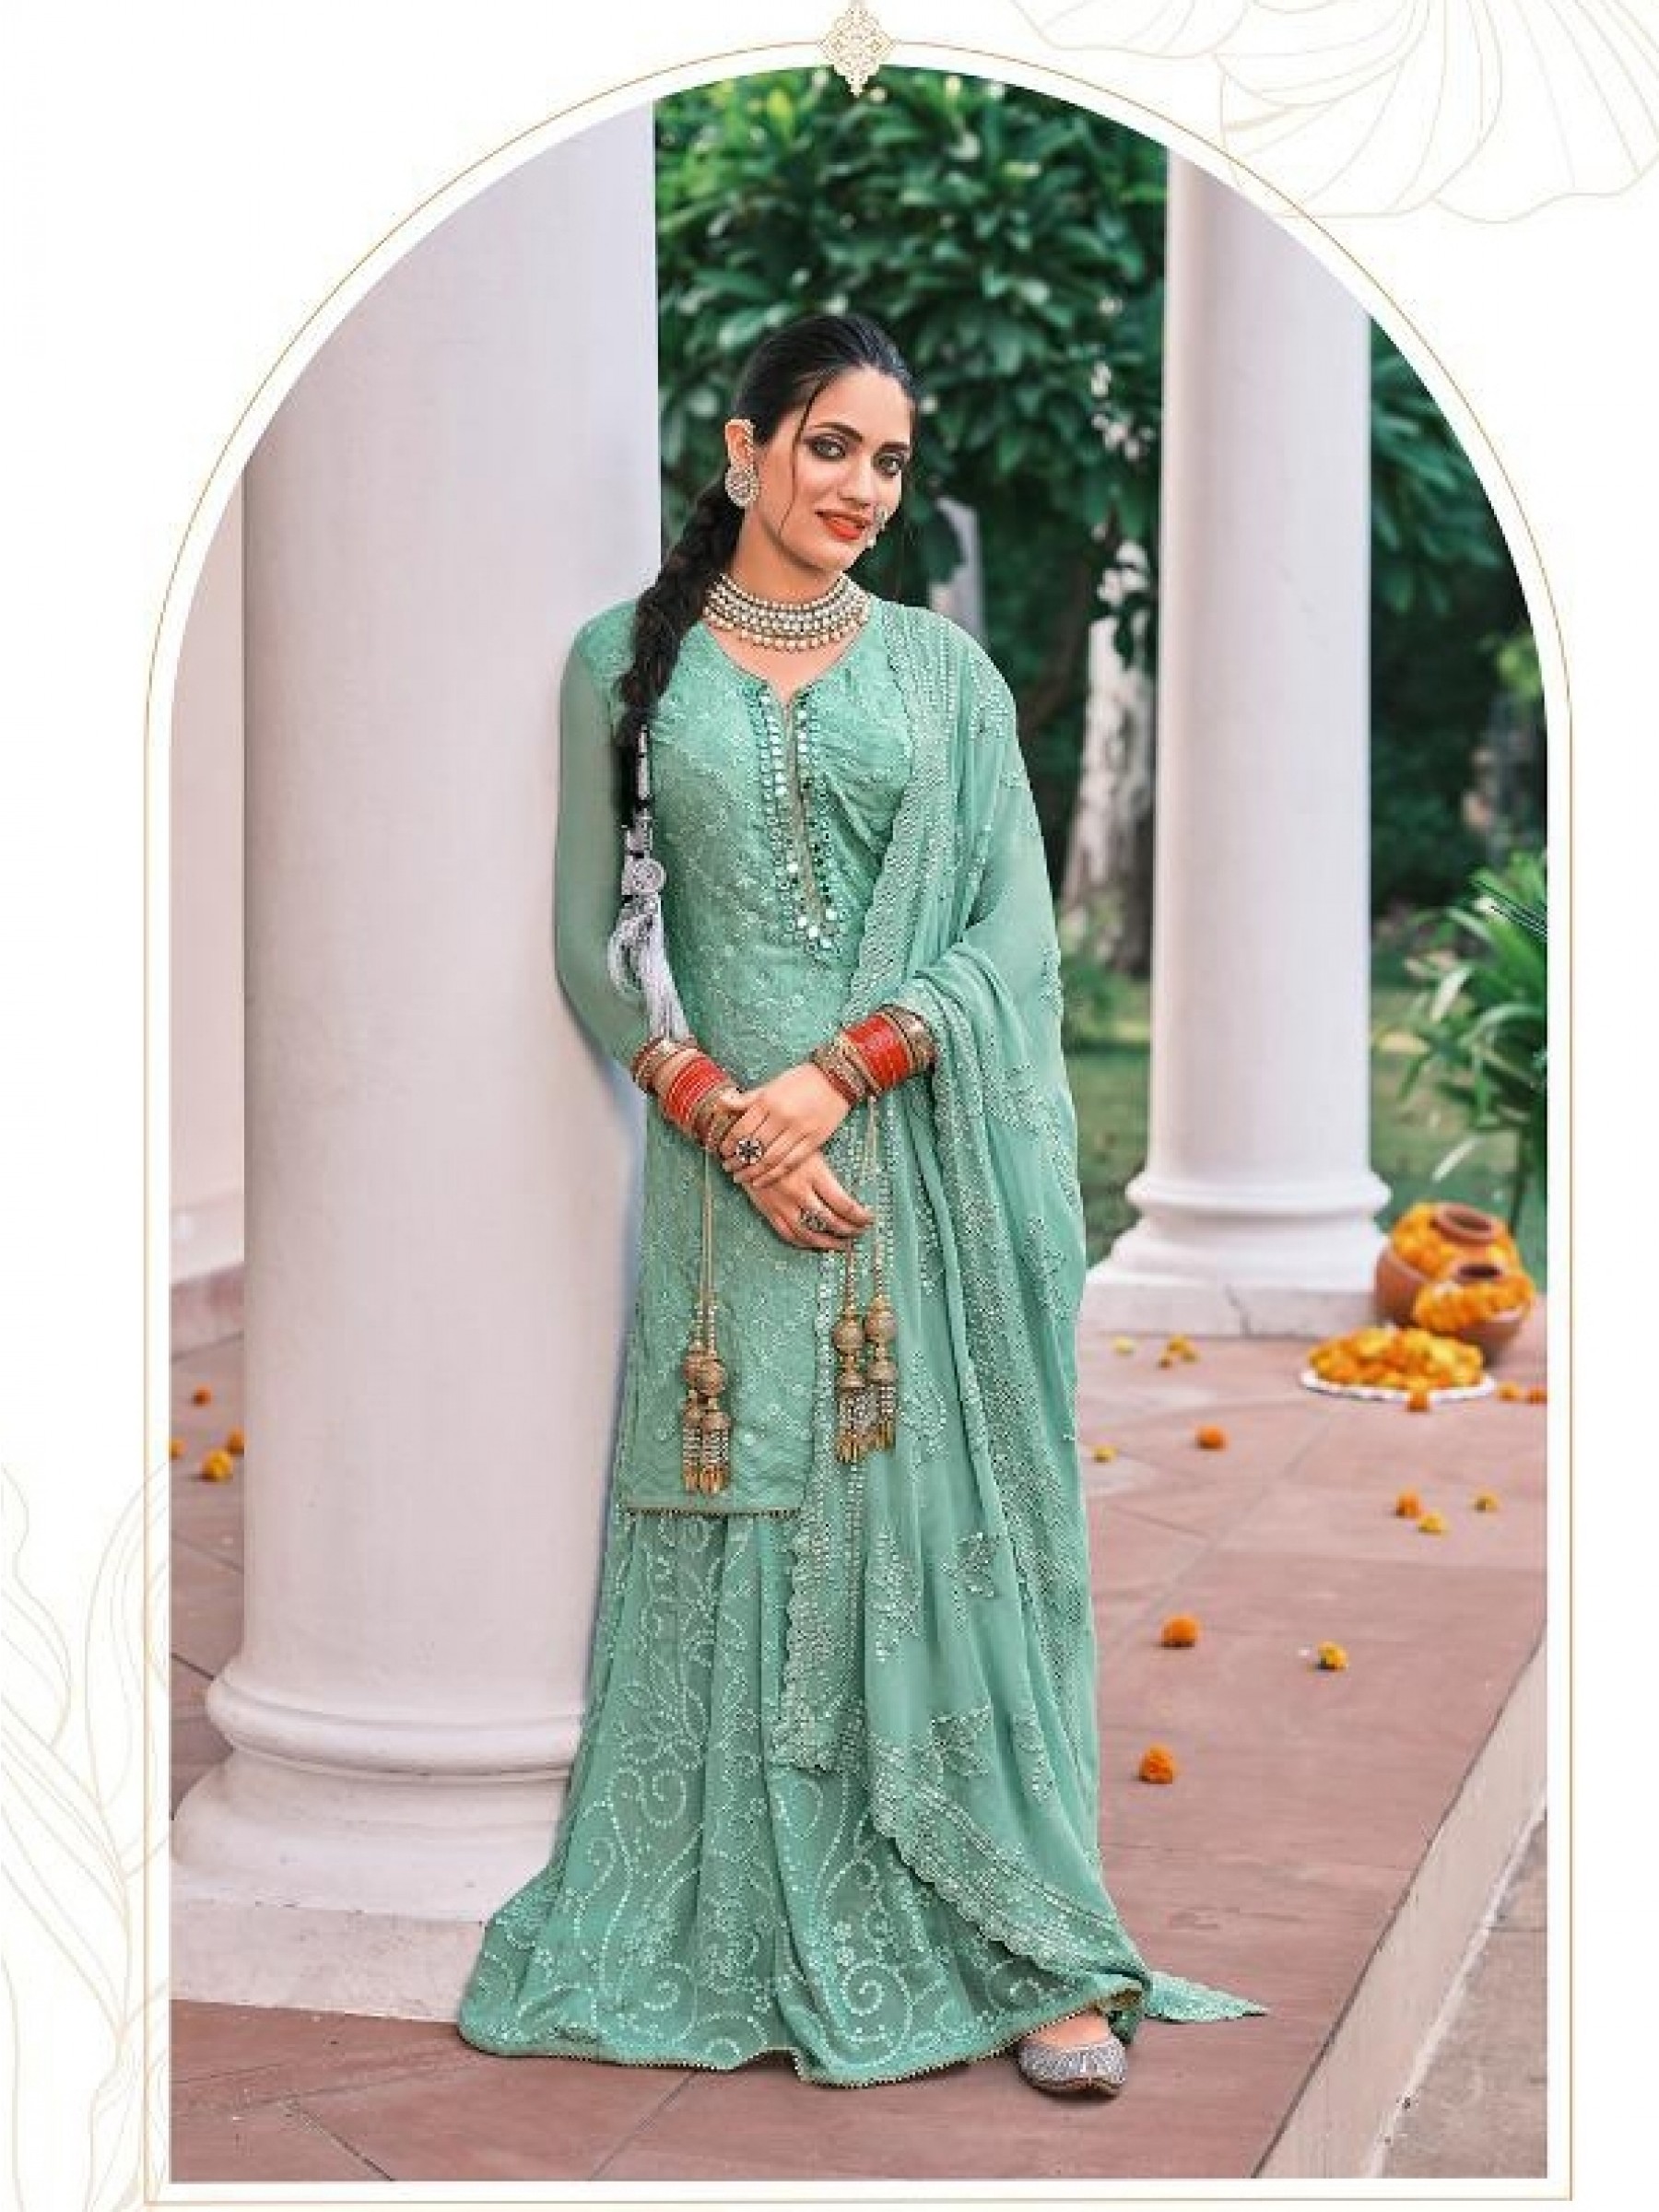 Real Geogratte  Party Wear  Readymade Sharara in Sea Green Color with  Embroidery Work